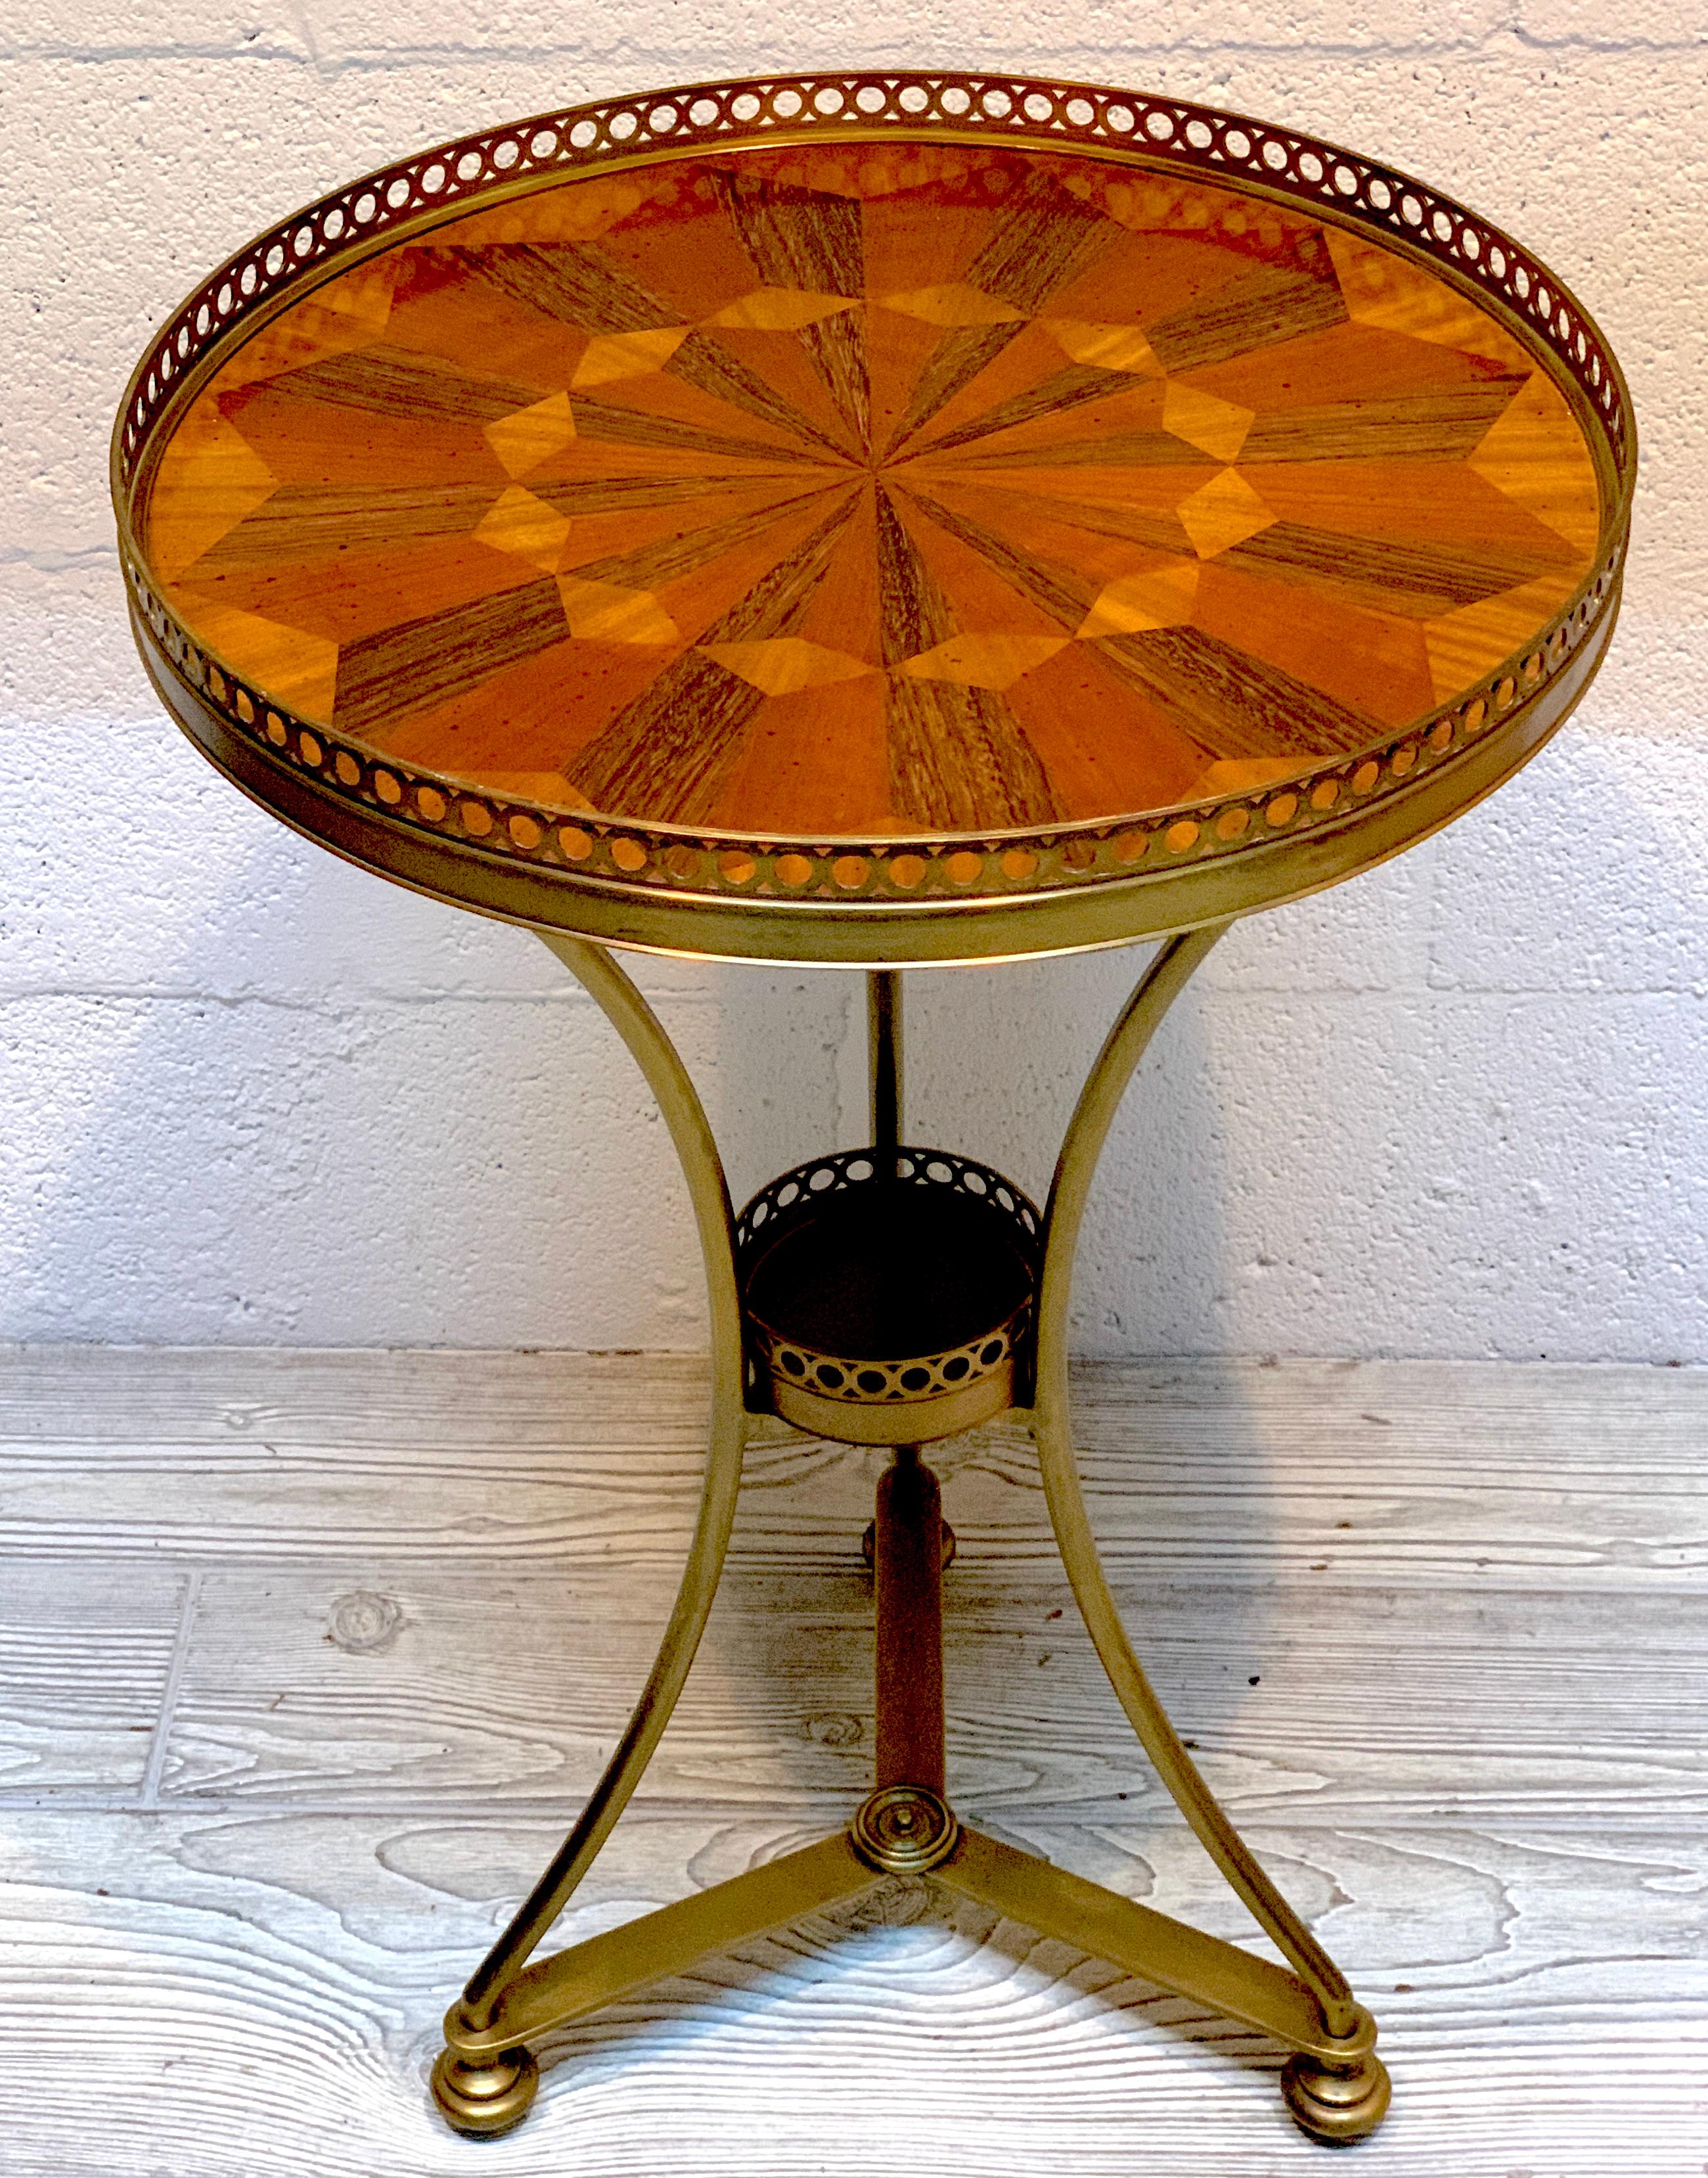 Diminutive Italian bronze and marquetry gueridon, of circular form, with pierced gallery surround the exotic wood marquetry top, raised on a tripartite base with 4